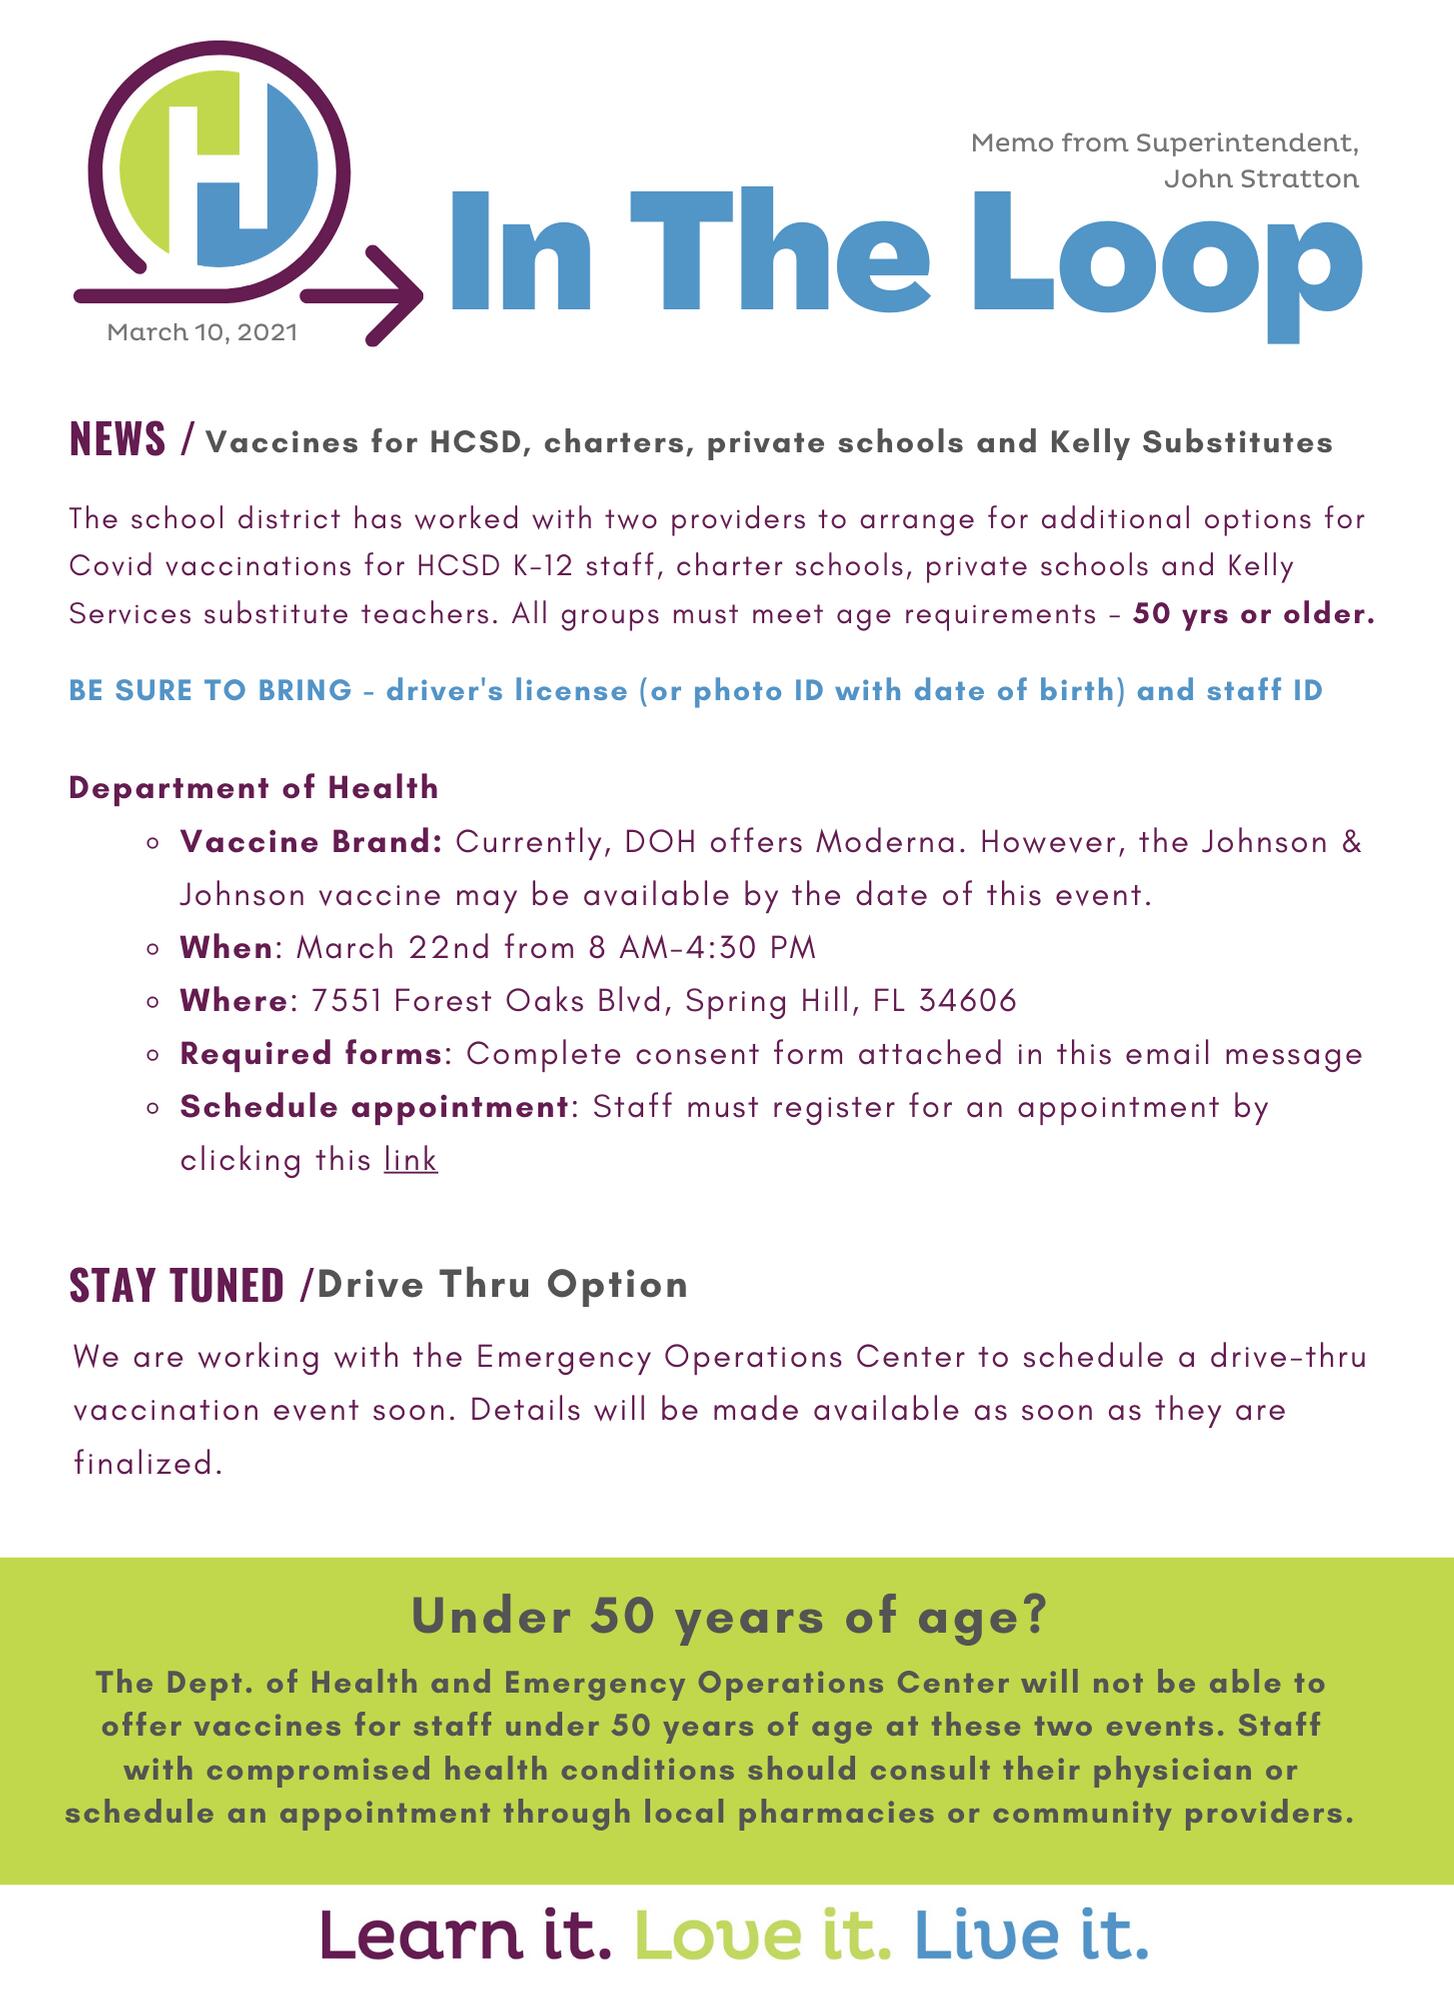 In the Loop - March 10 newsletter